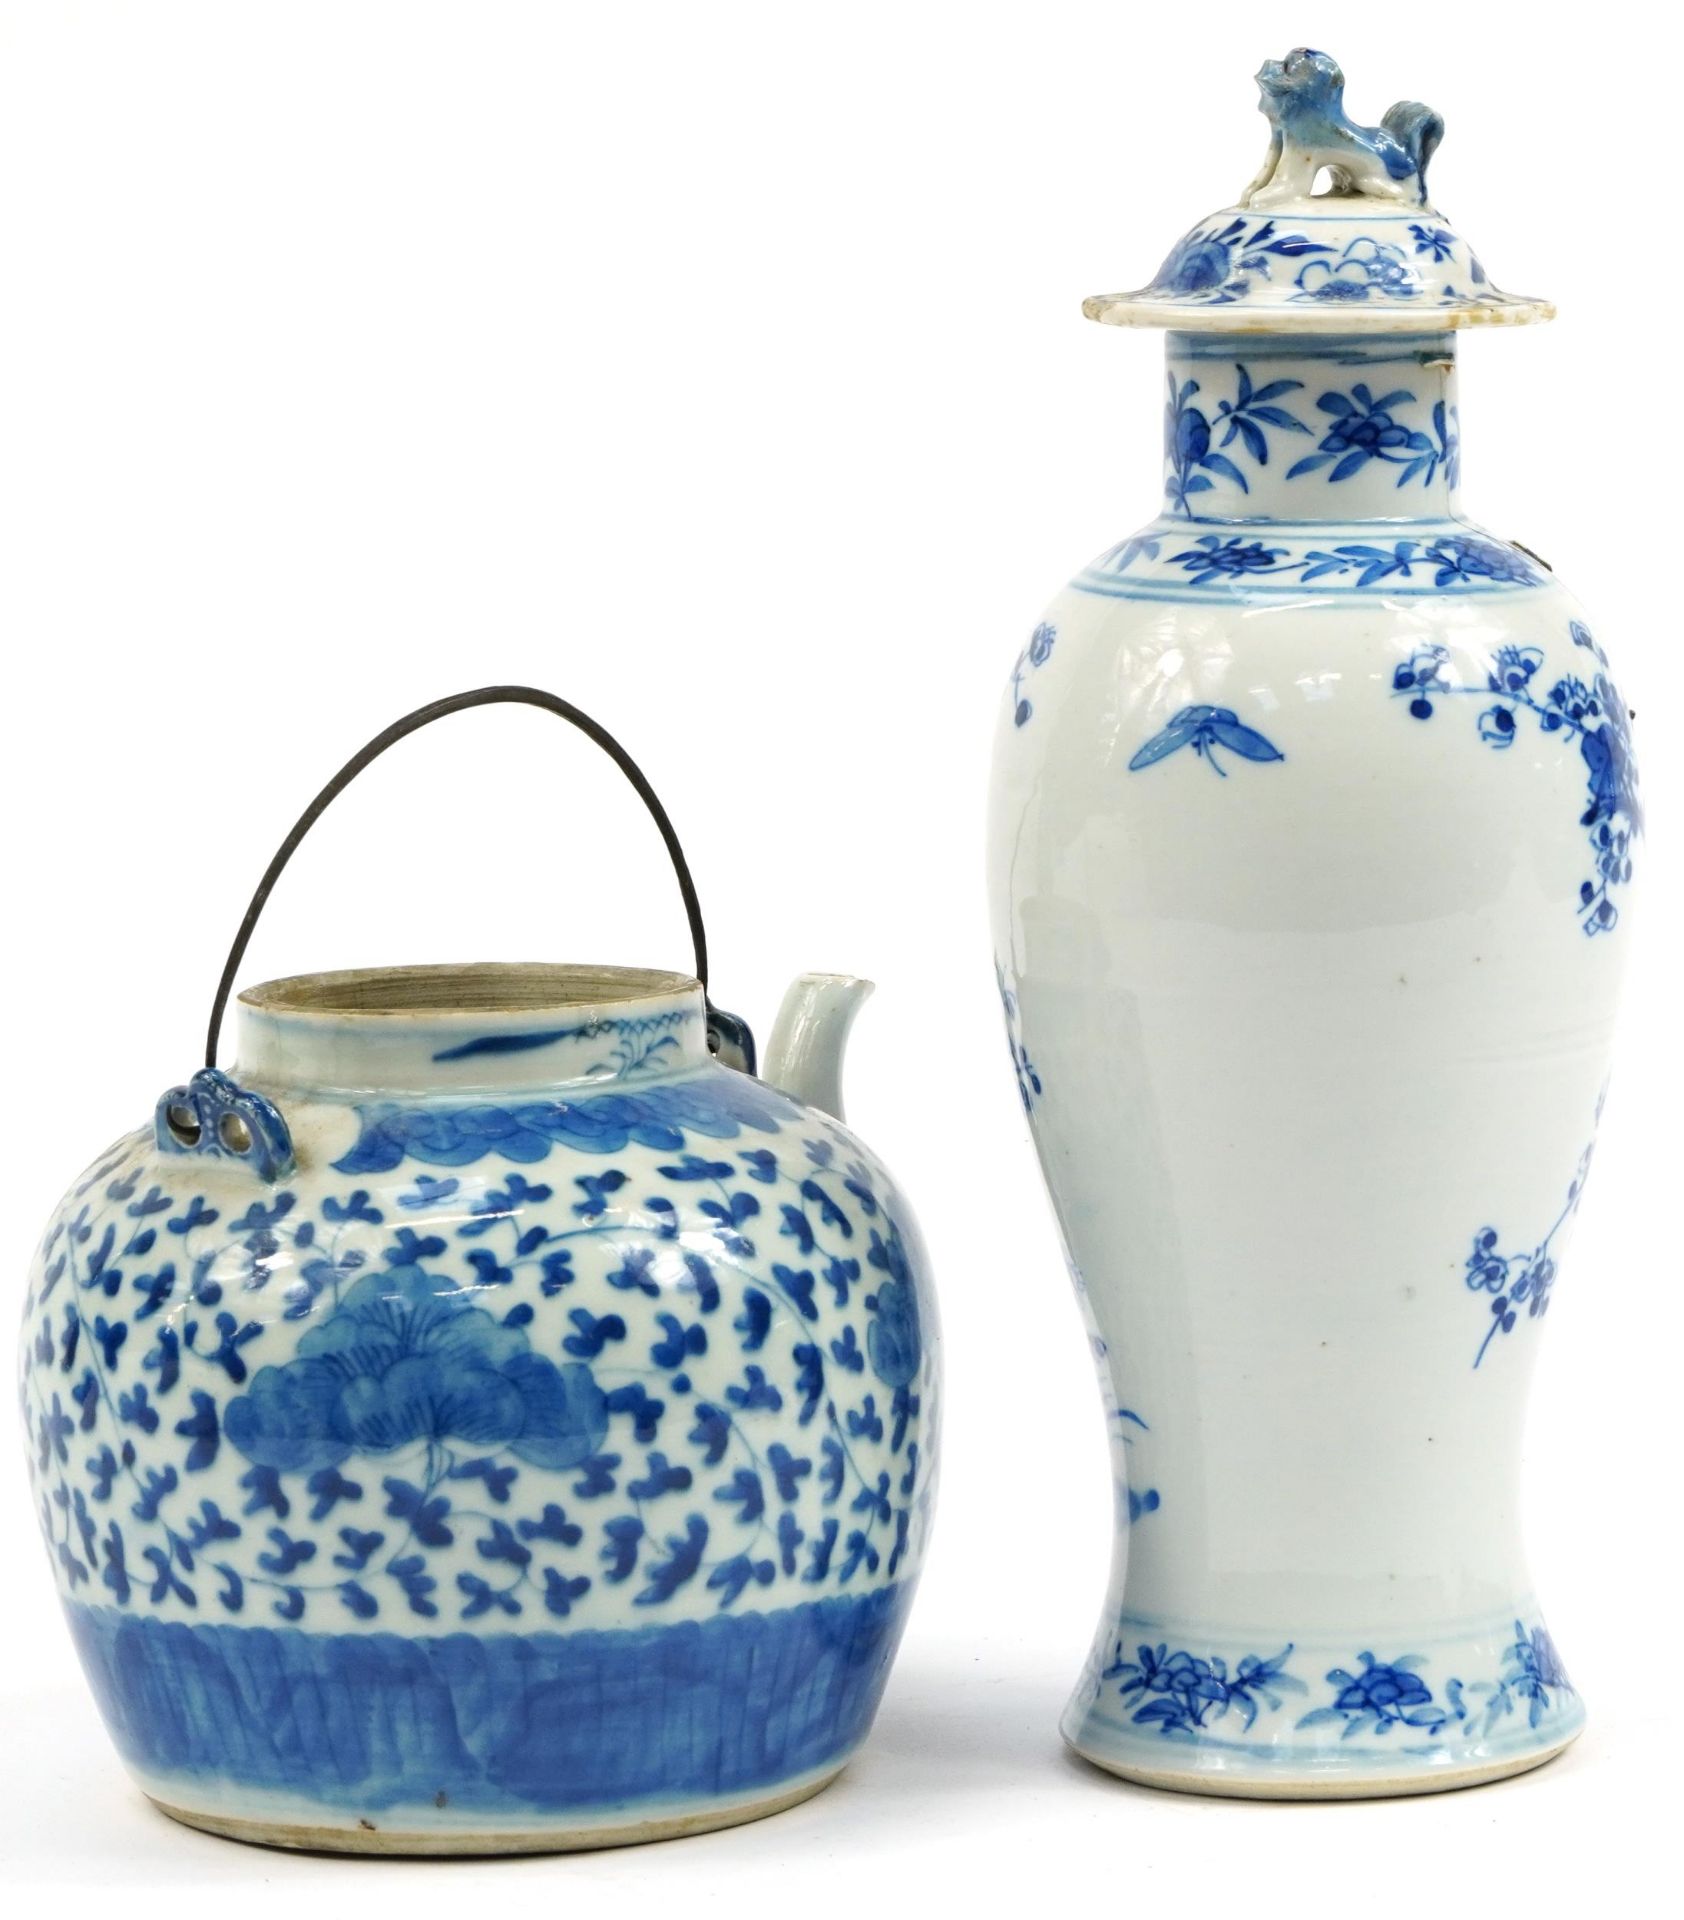 Chinese blue and white porcelain comprising a baluster vase and teapot, the largest 31.5cm high - Image 2 of 3